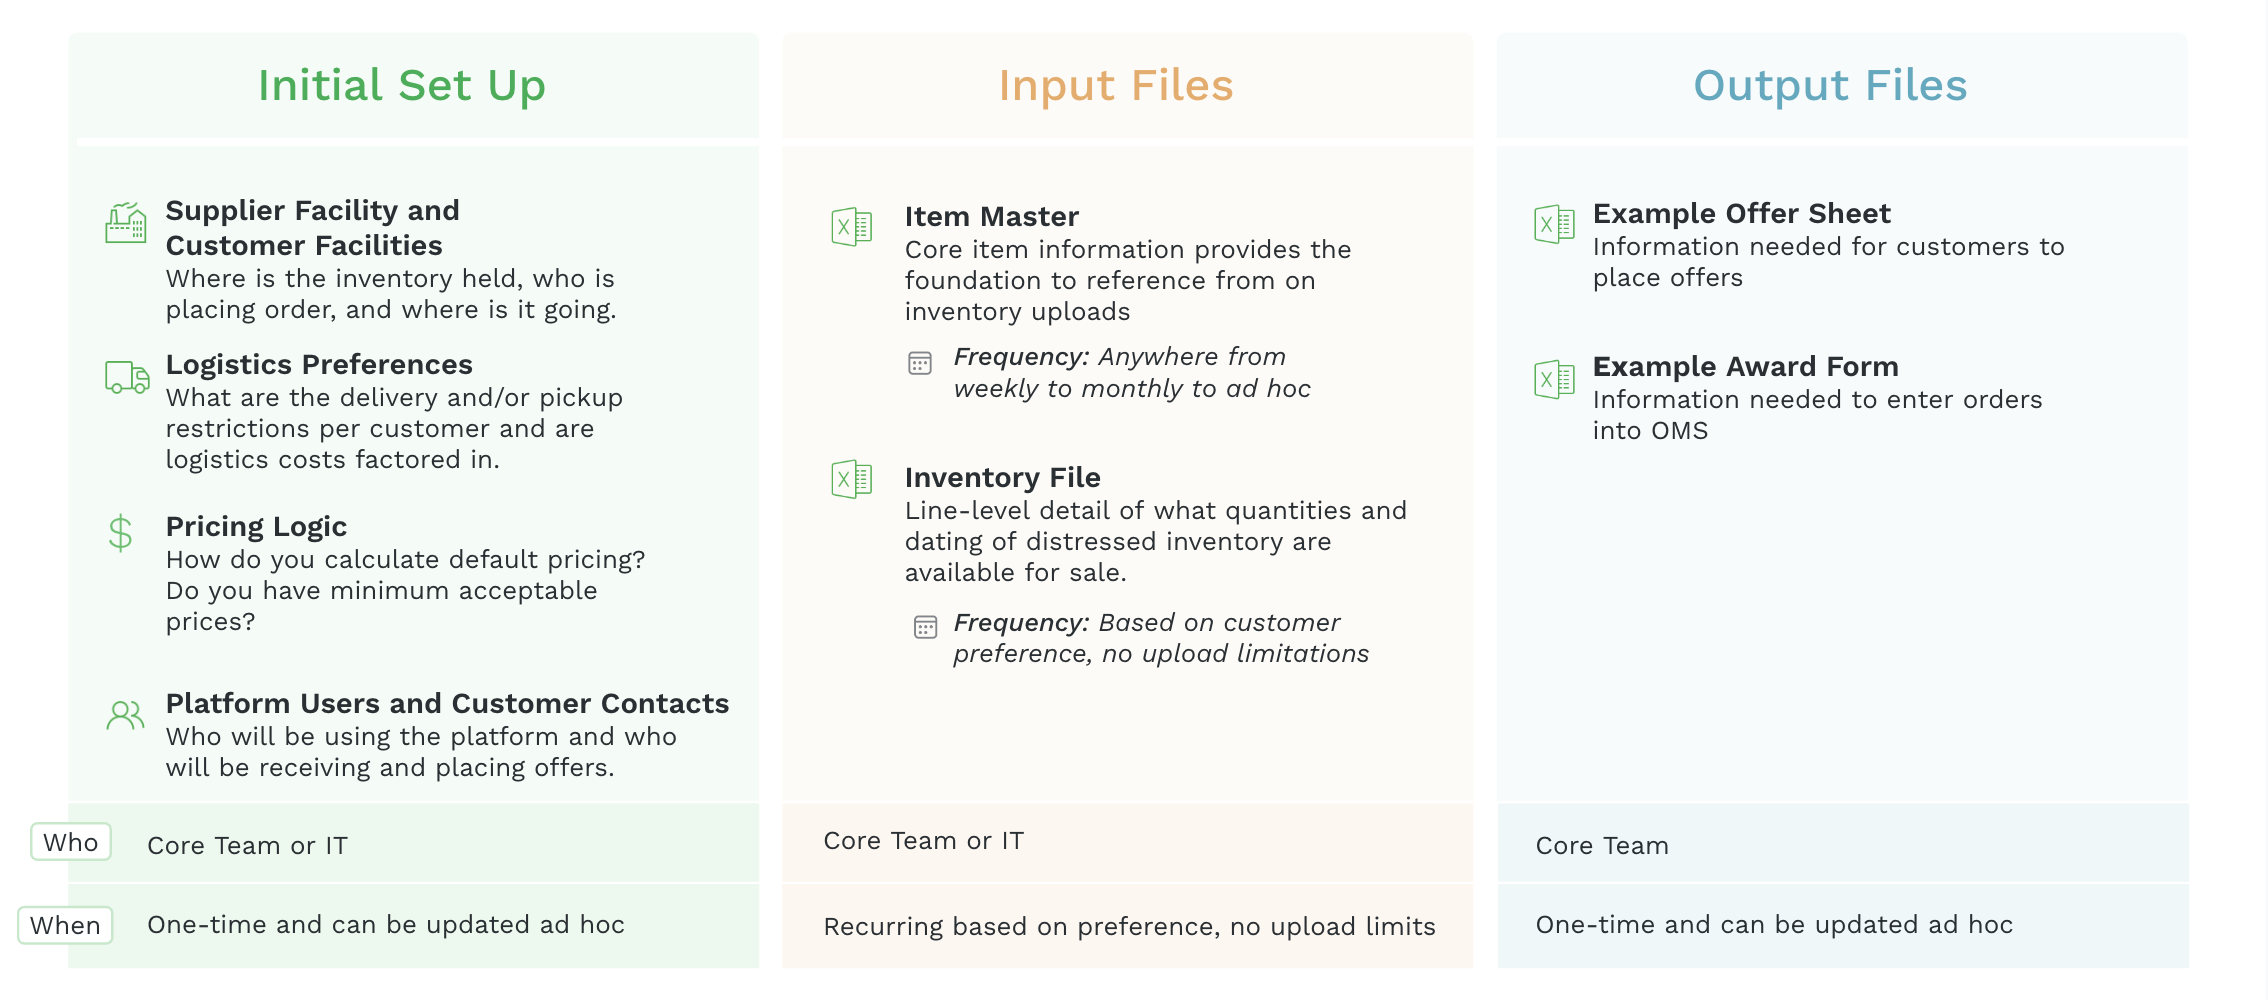 Chart of file types for implementation